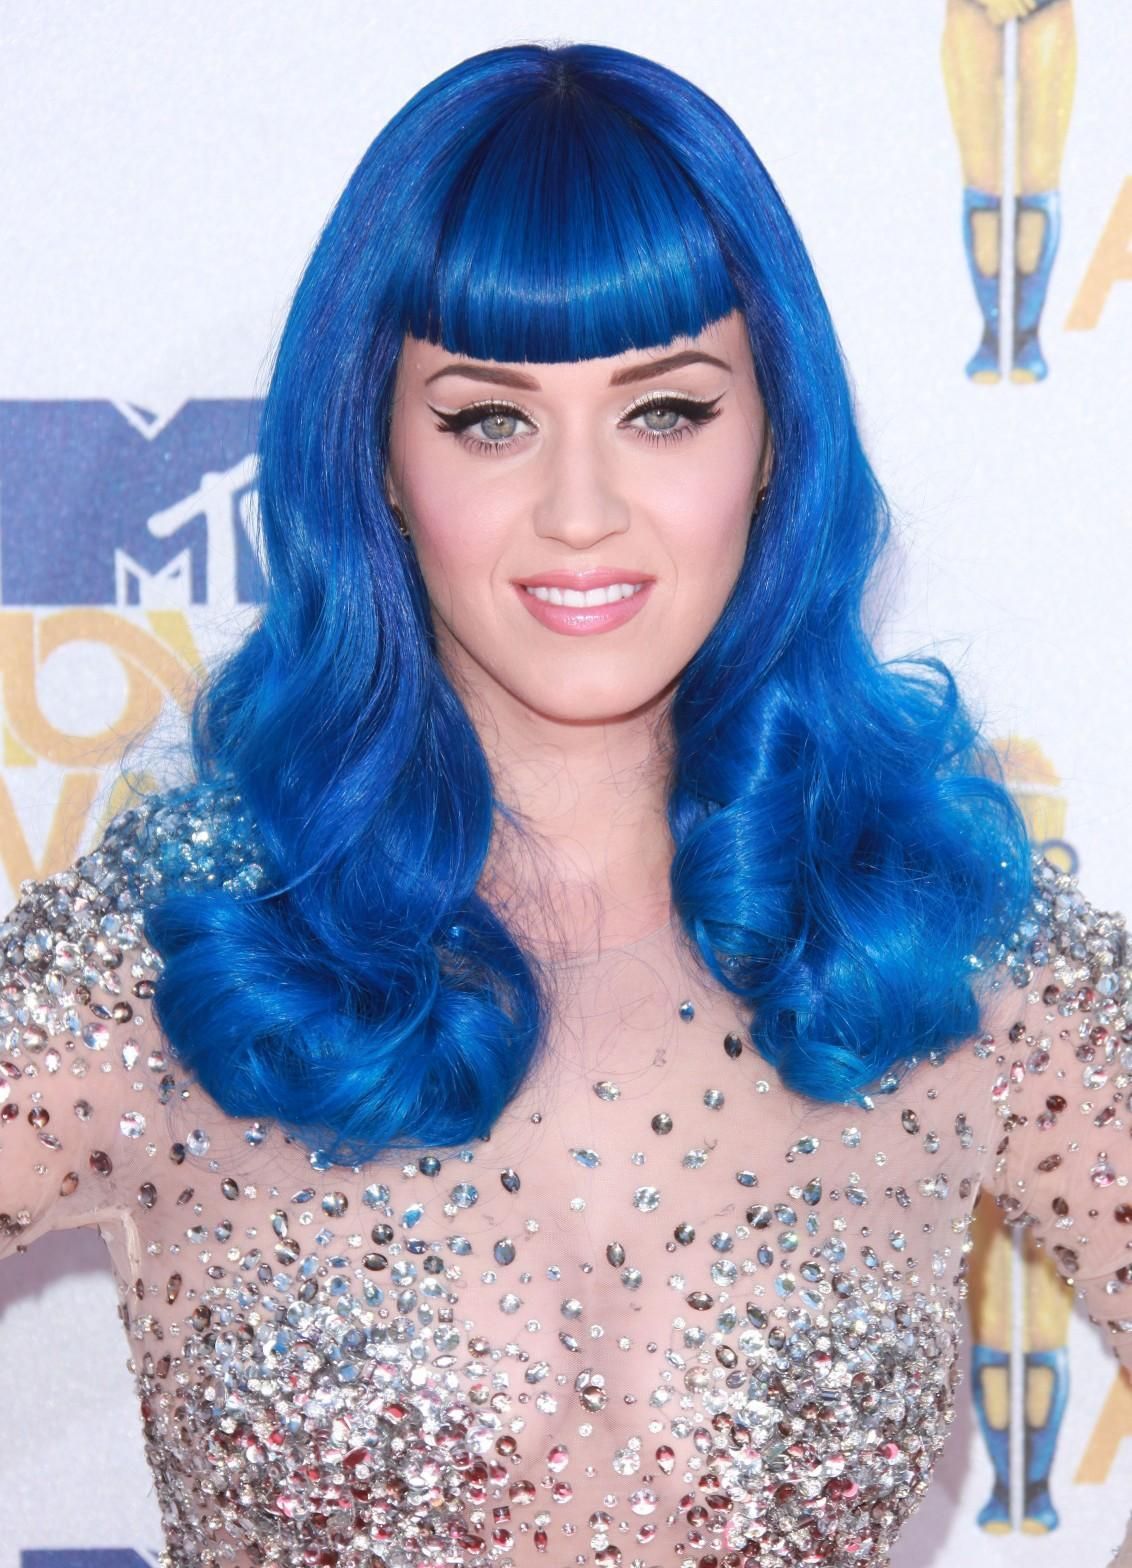 halloween costume accessories colored hair katy perrys style